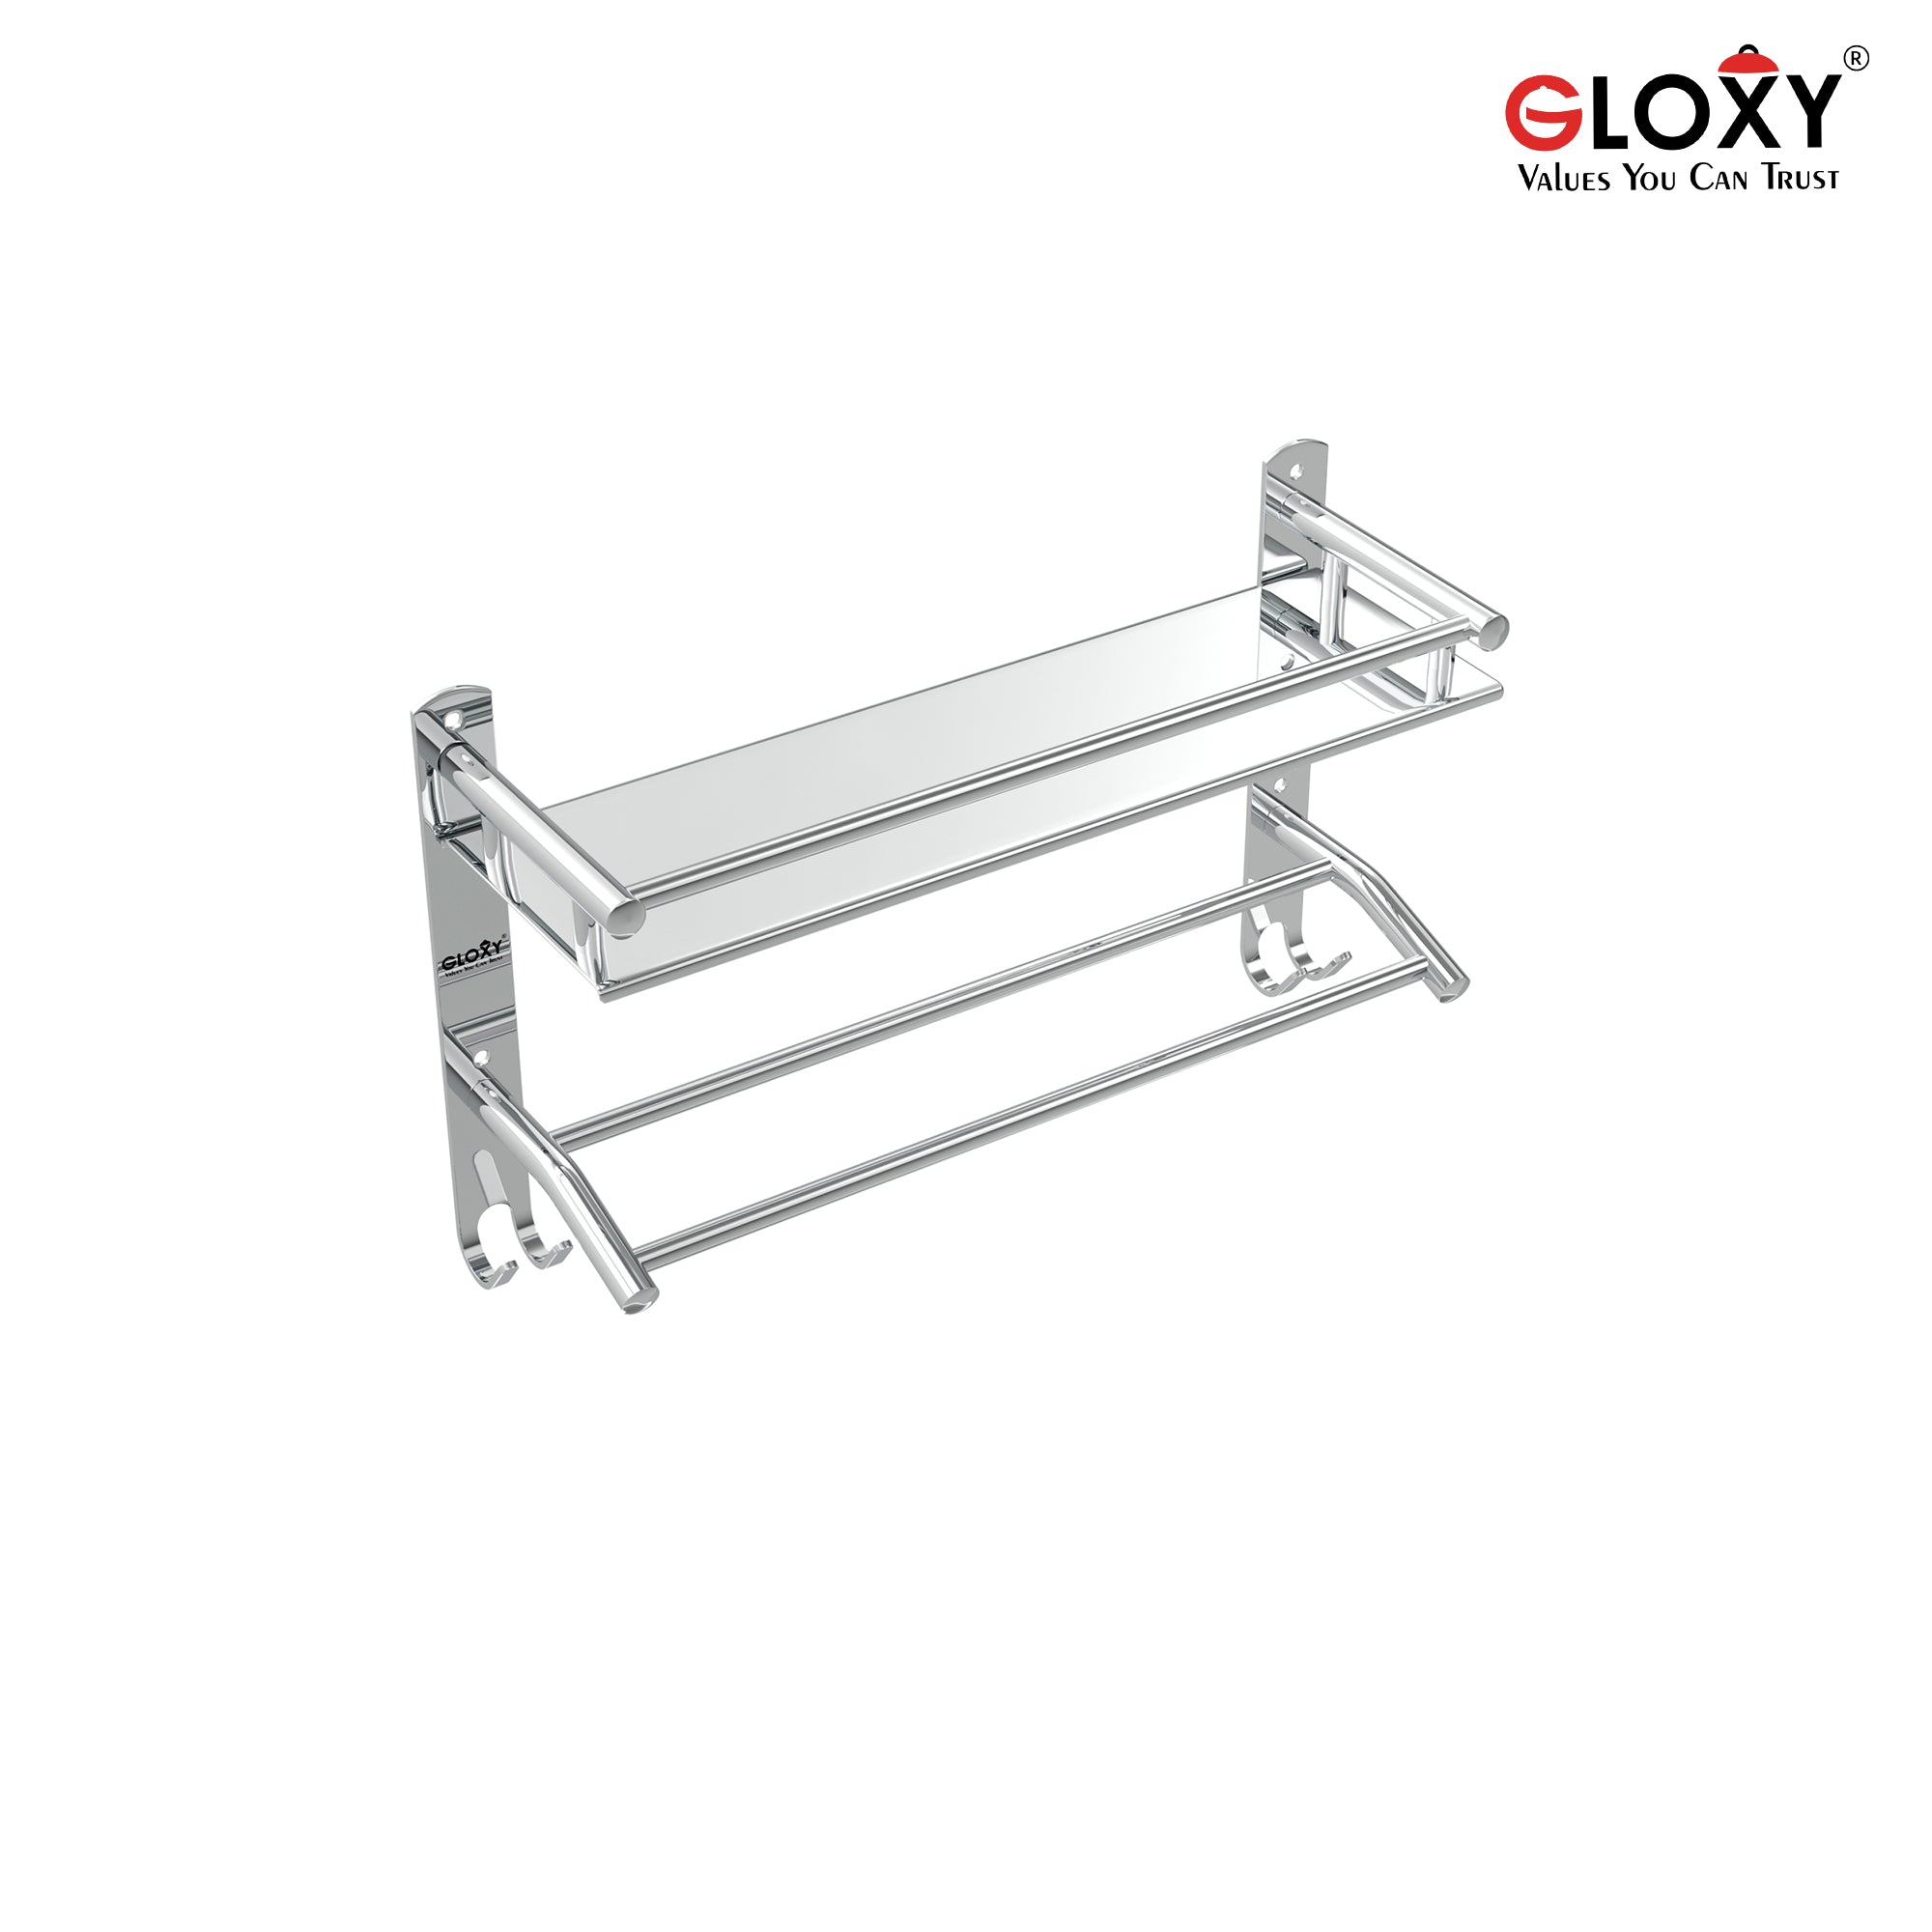 Stainless Steel Single Layer Shelf With Towel Rod 15*5 inch